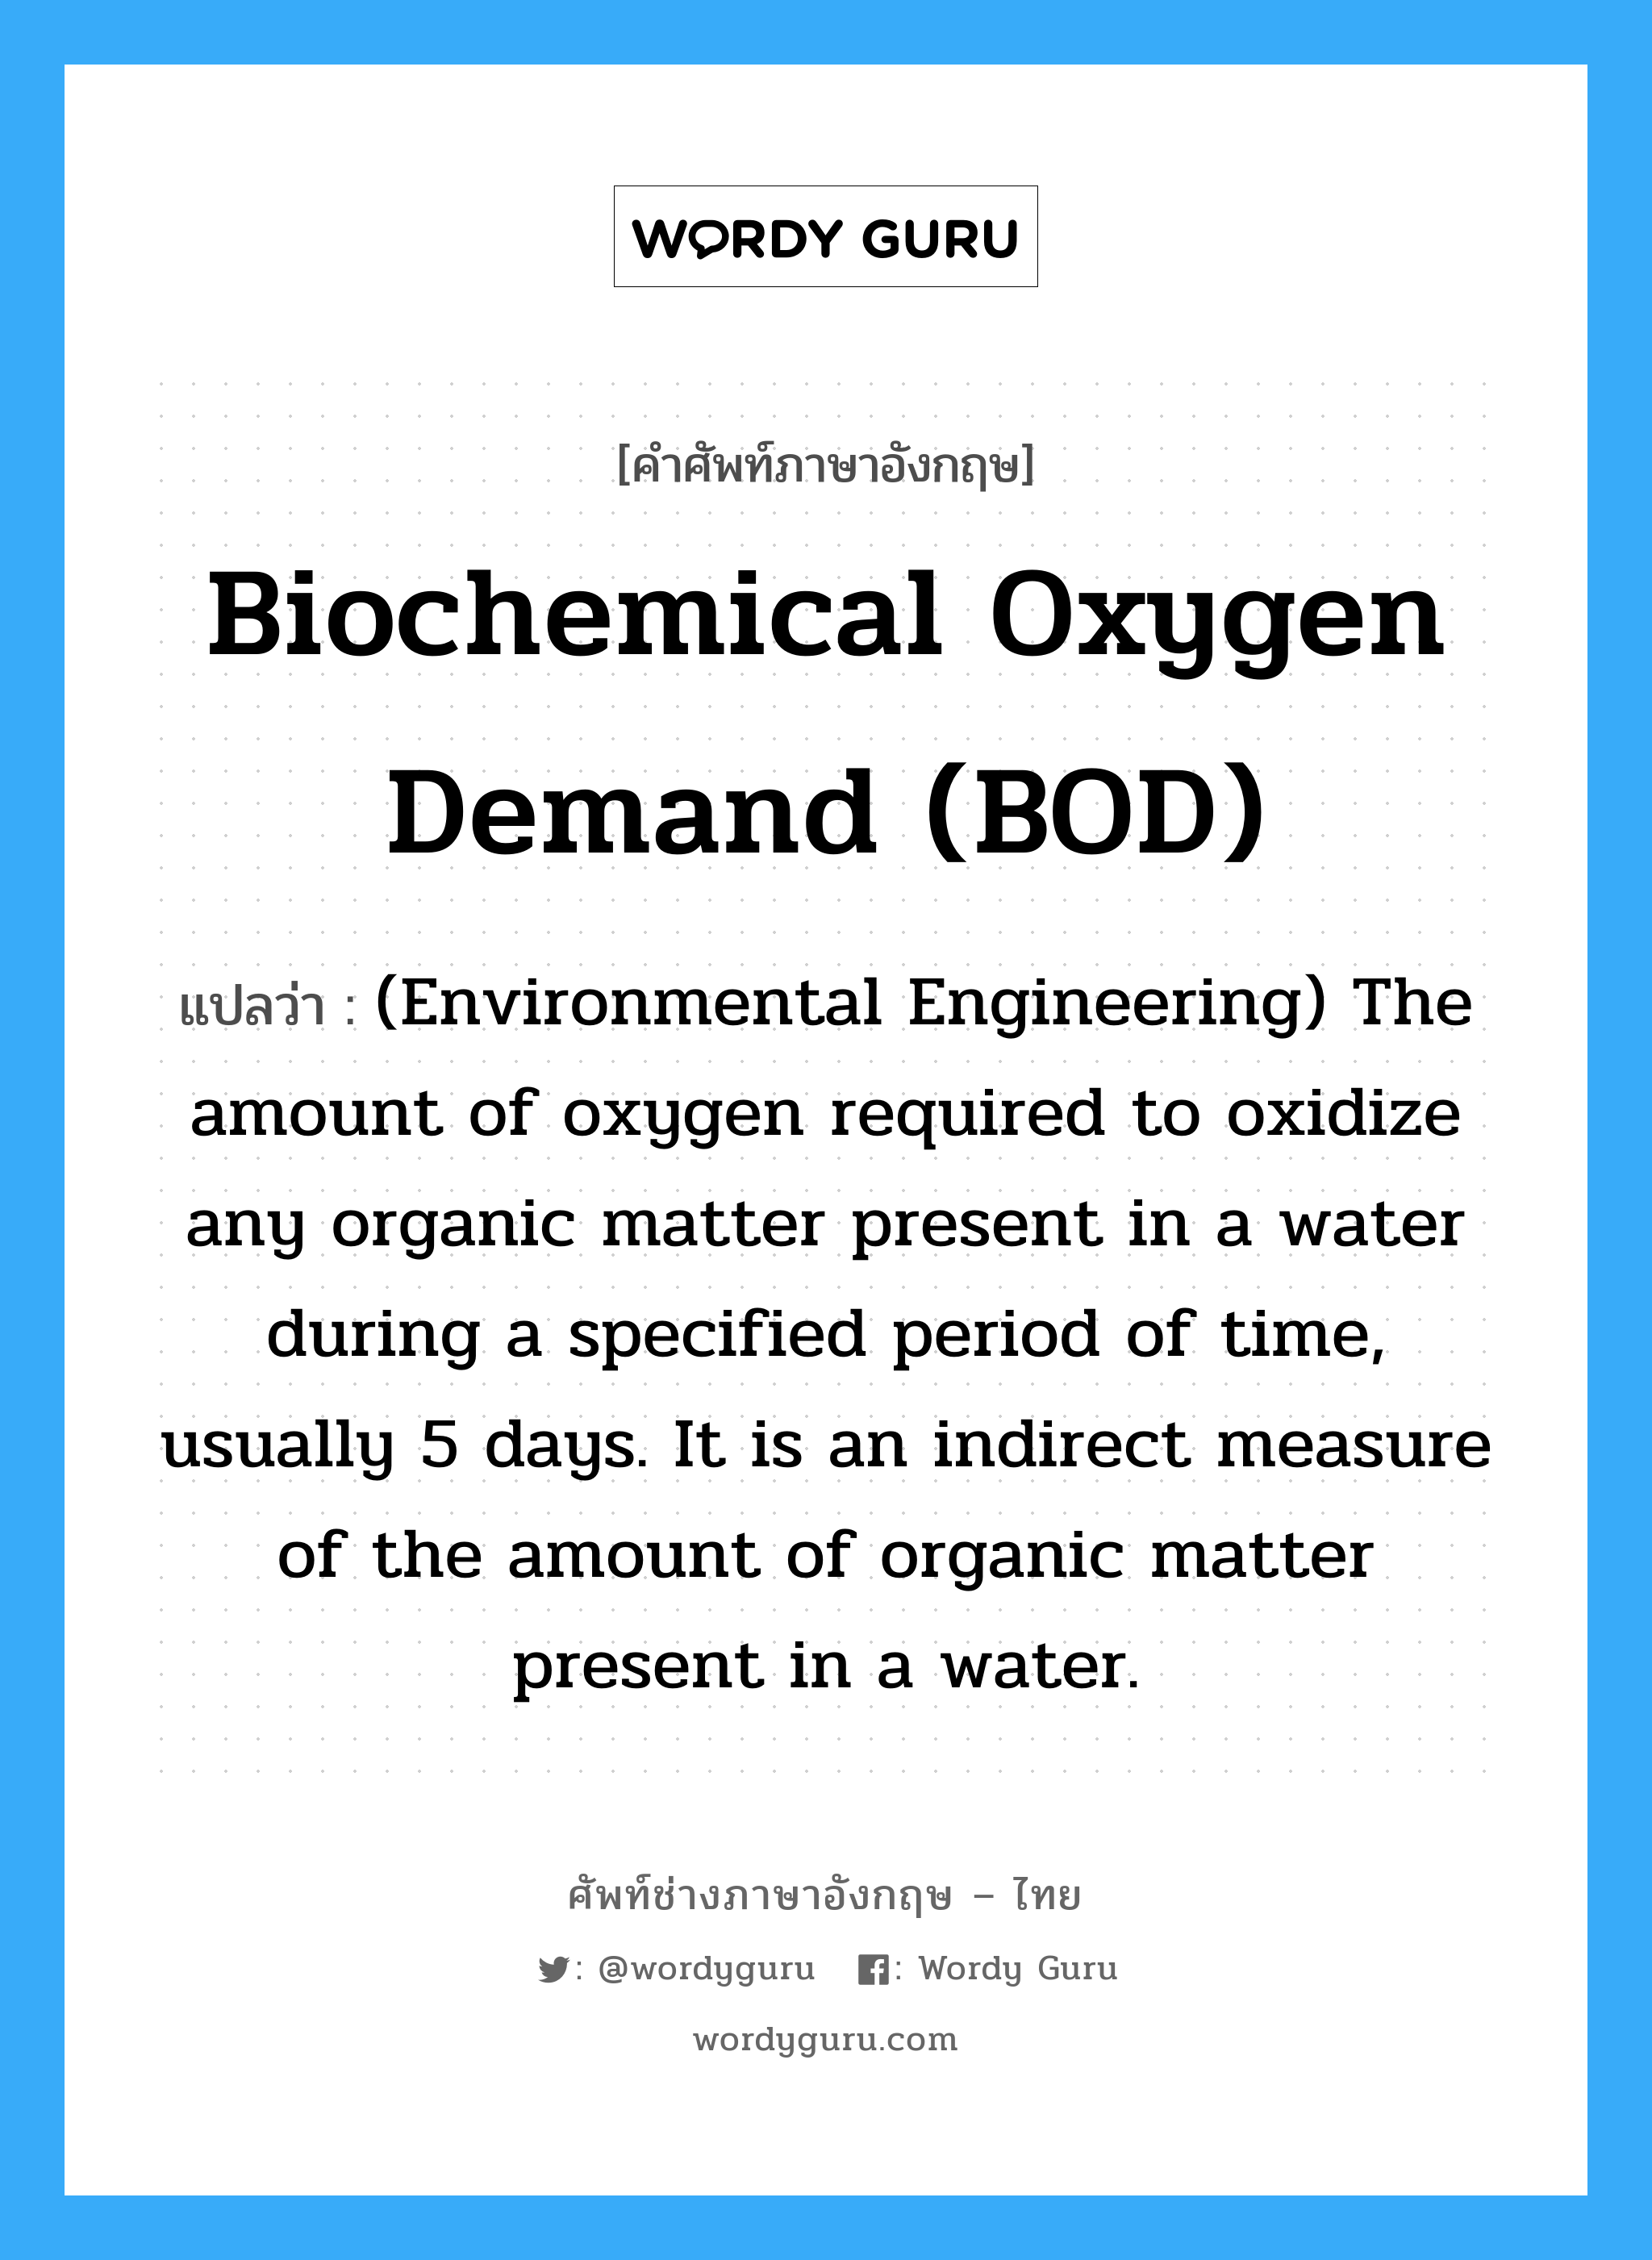 Biochemical oxygen demand (BOD) แปลว่า?, คำศัพท์ช่างภาษาอังกฤษ - ไทย Biochemical oxygen demand (BOD) คำศัพท์ภาษาอังกฤษ Biochemical oxygen demand (BOD) แปลว่า (Environmental Engineering) The amount of oxygen required to oxidize any organic matter present in a water during a specified period of time, usually 5 days. It is an indirect measure of the amount of organic matter present in a water.